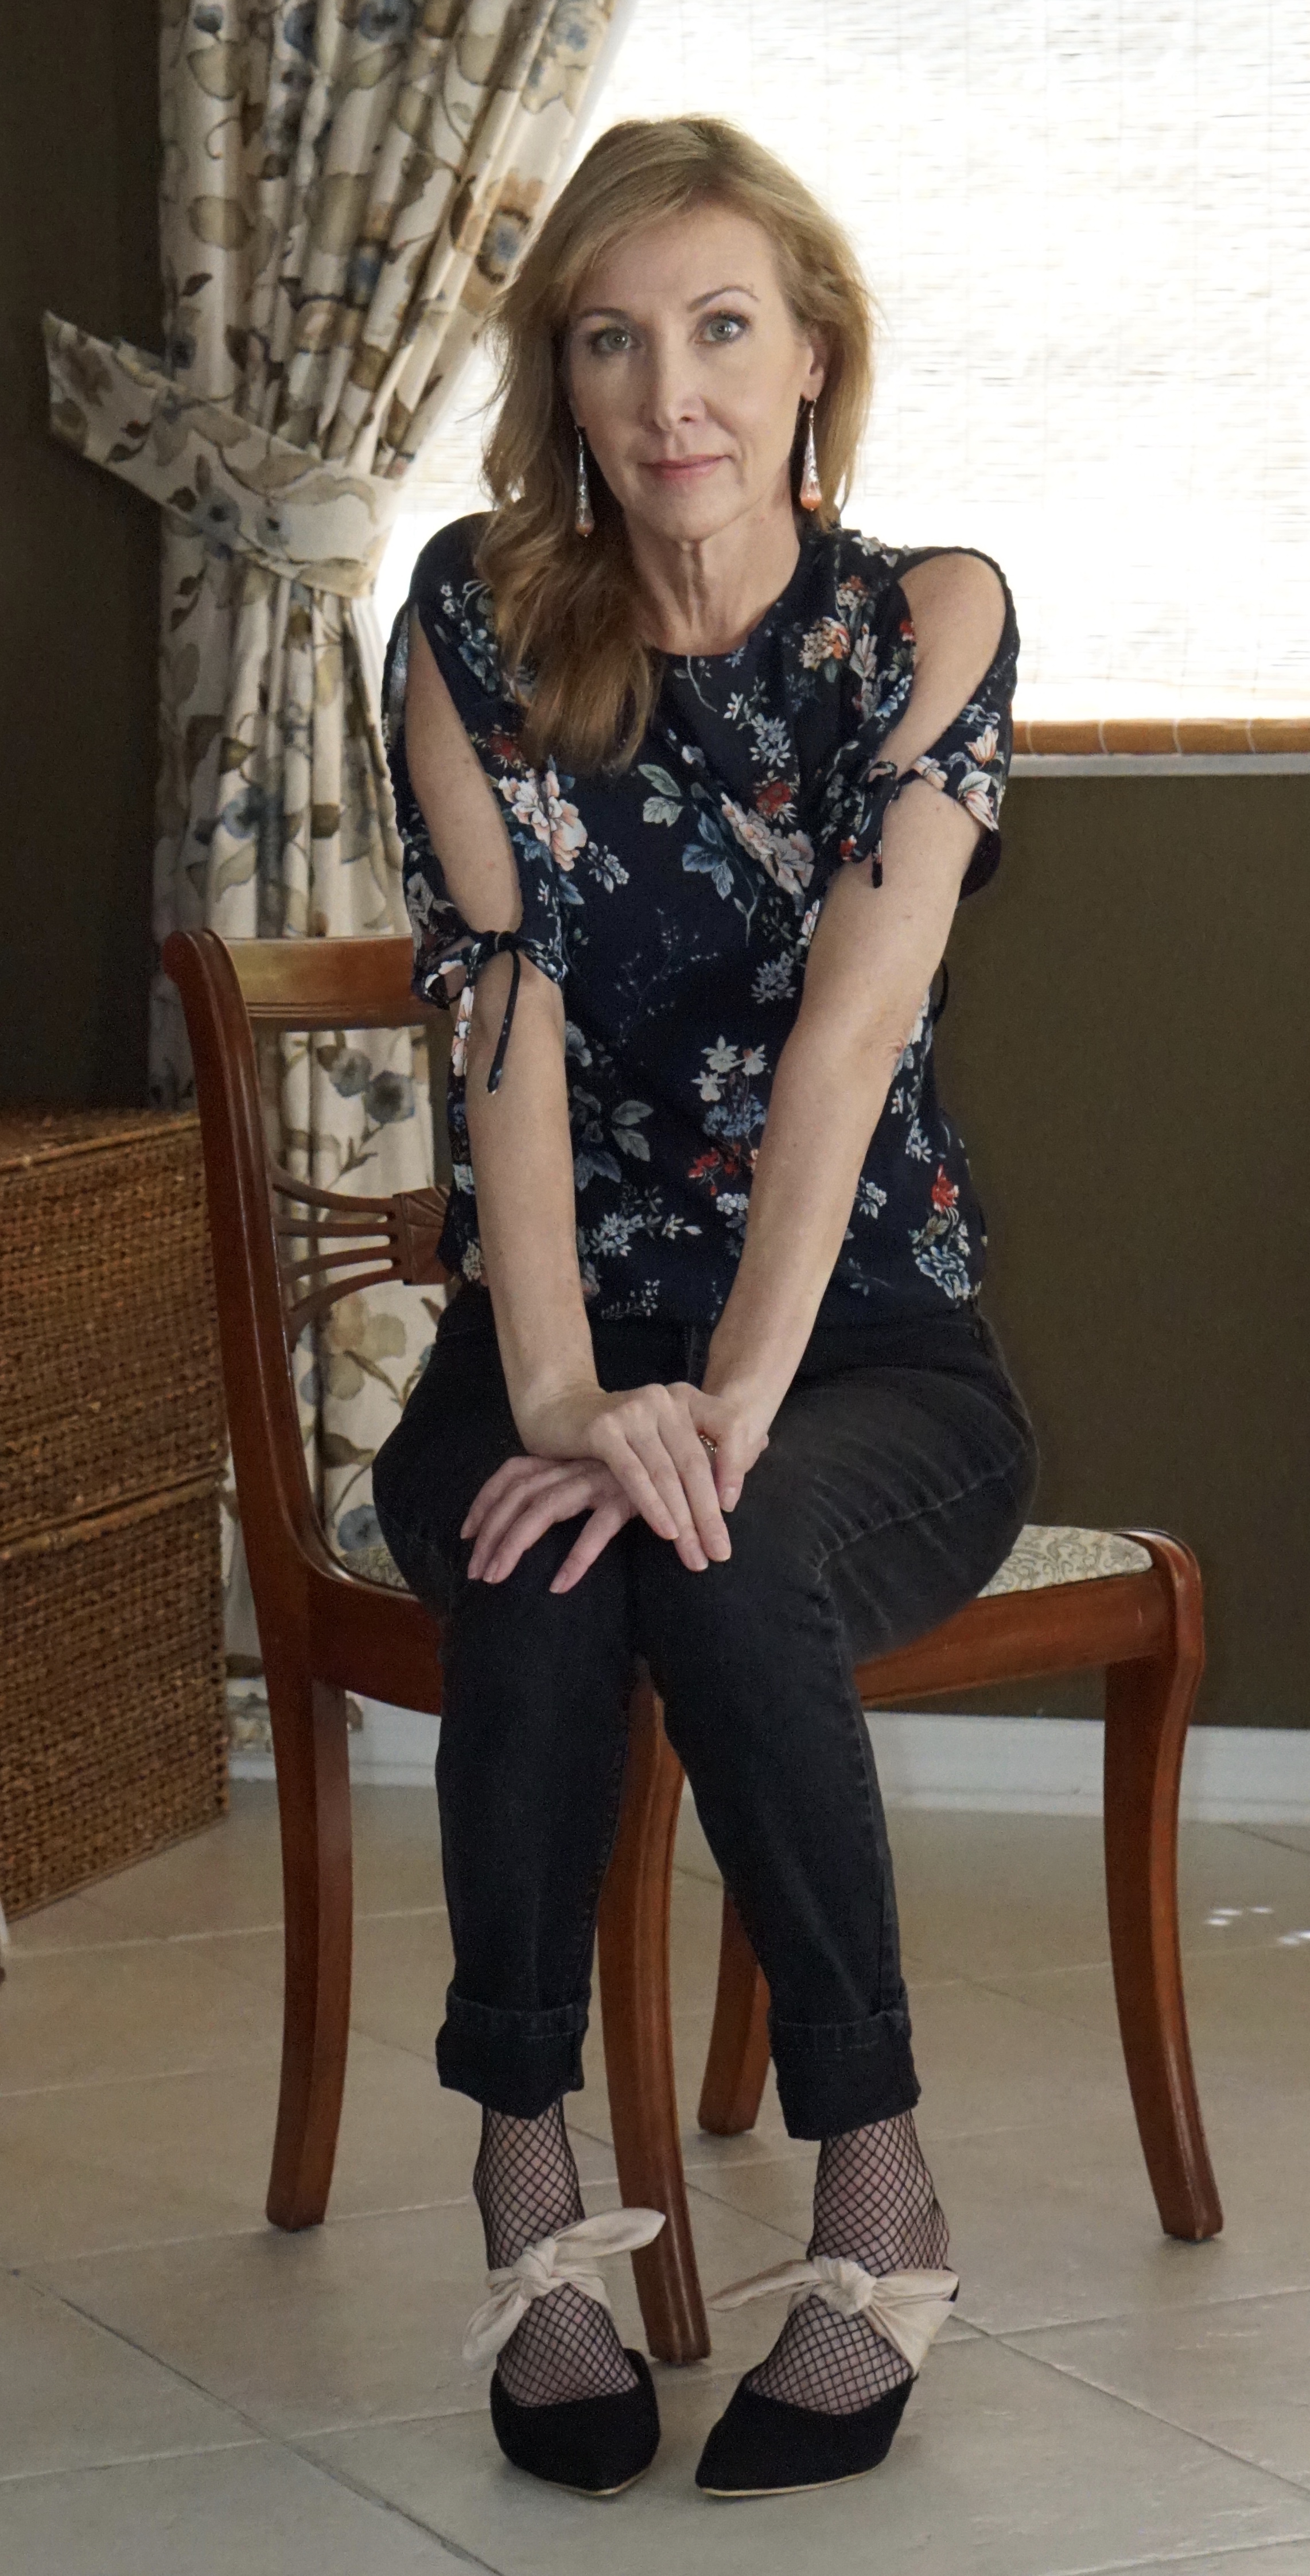 Woman sitting in chair wearing floral shirt and bow tie shoes